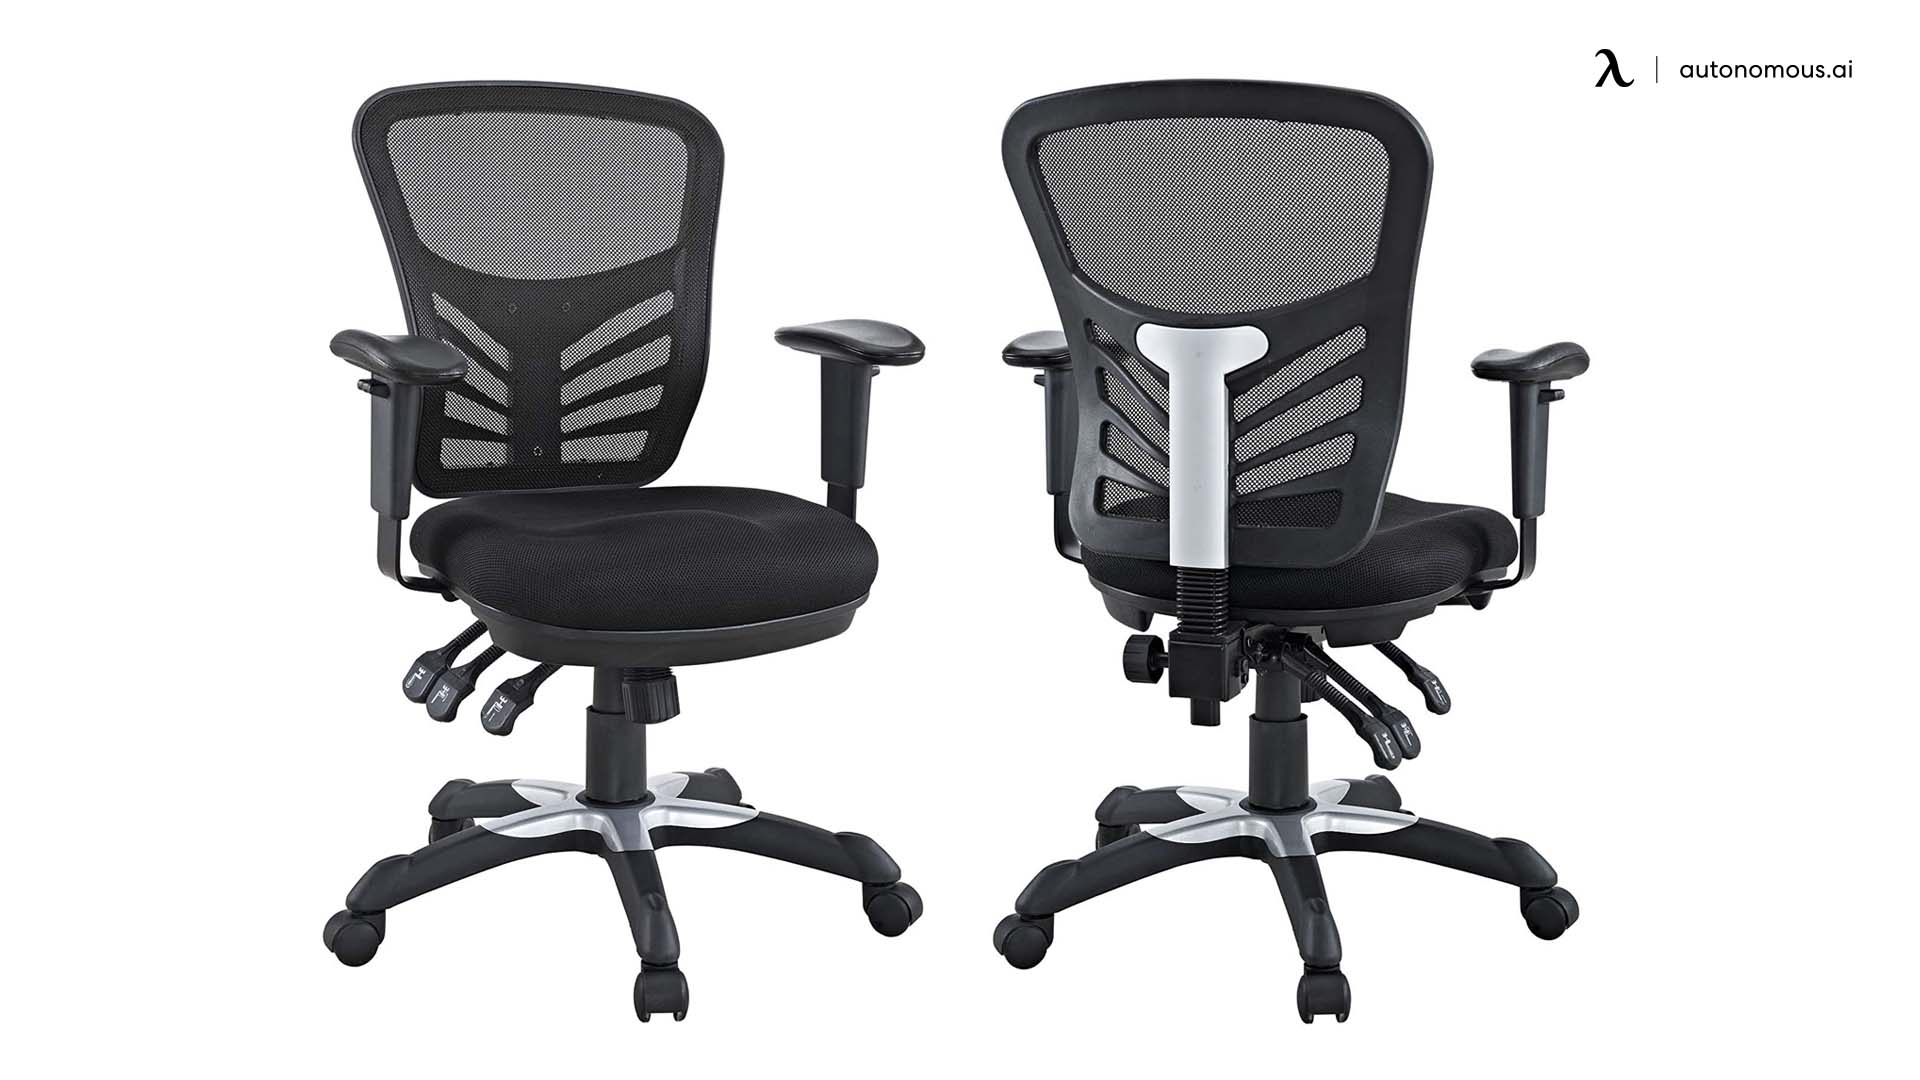 Modway mesh office chair